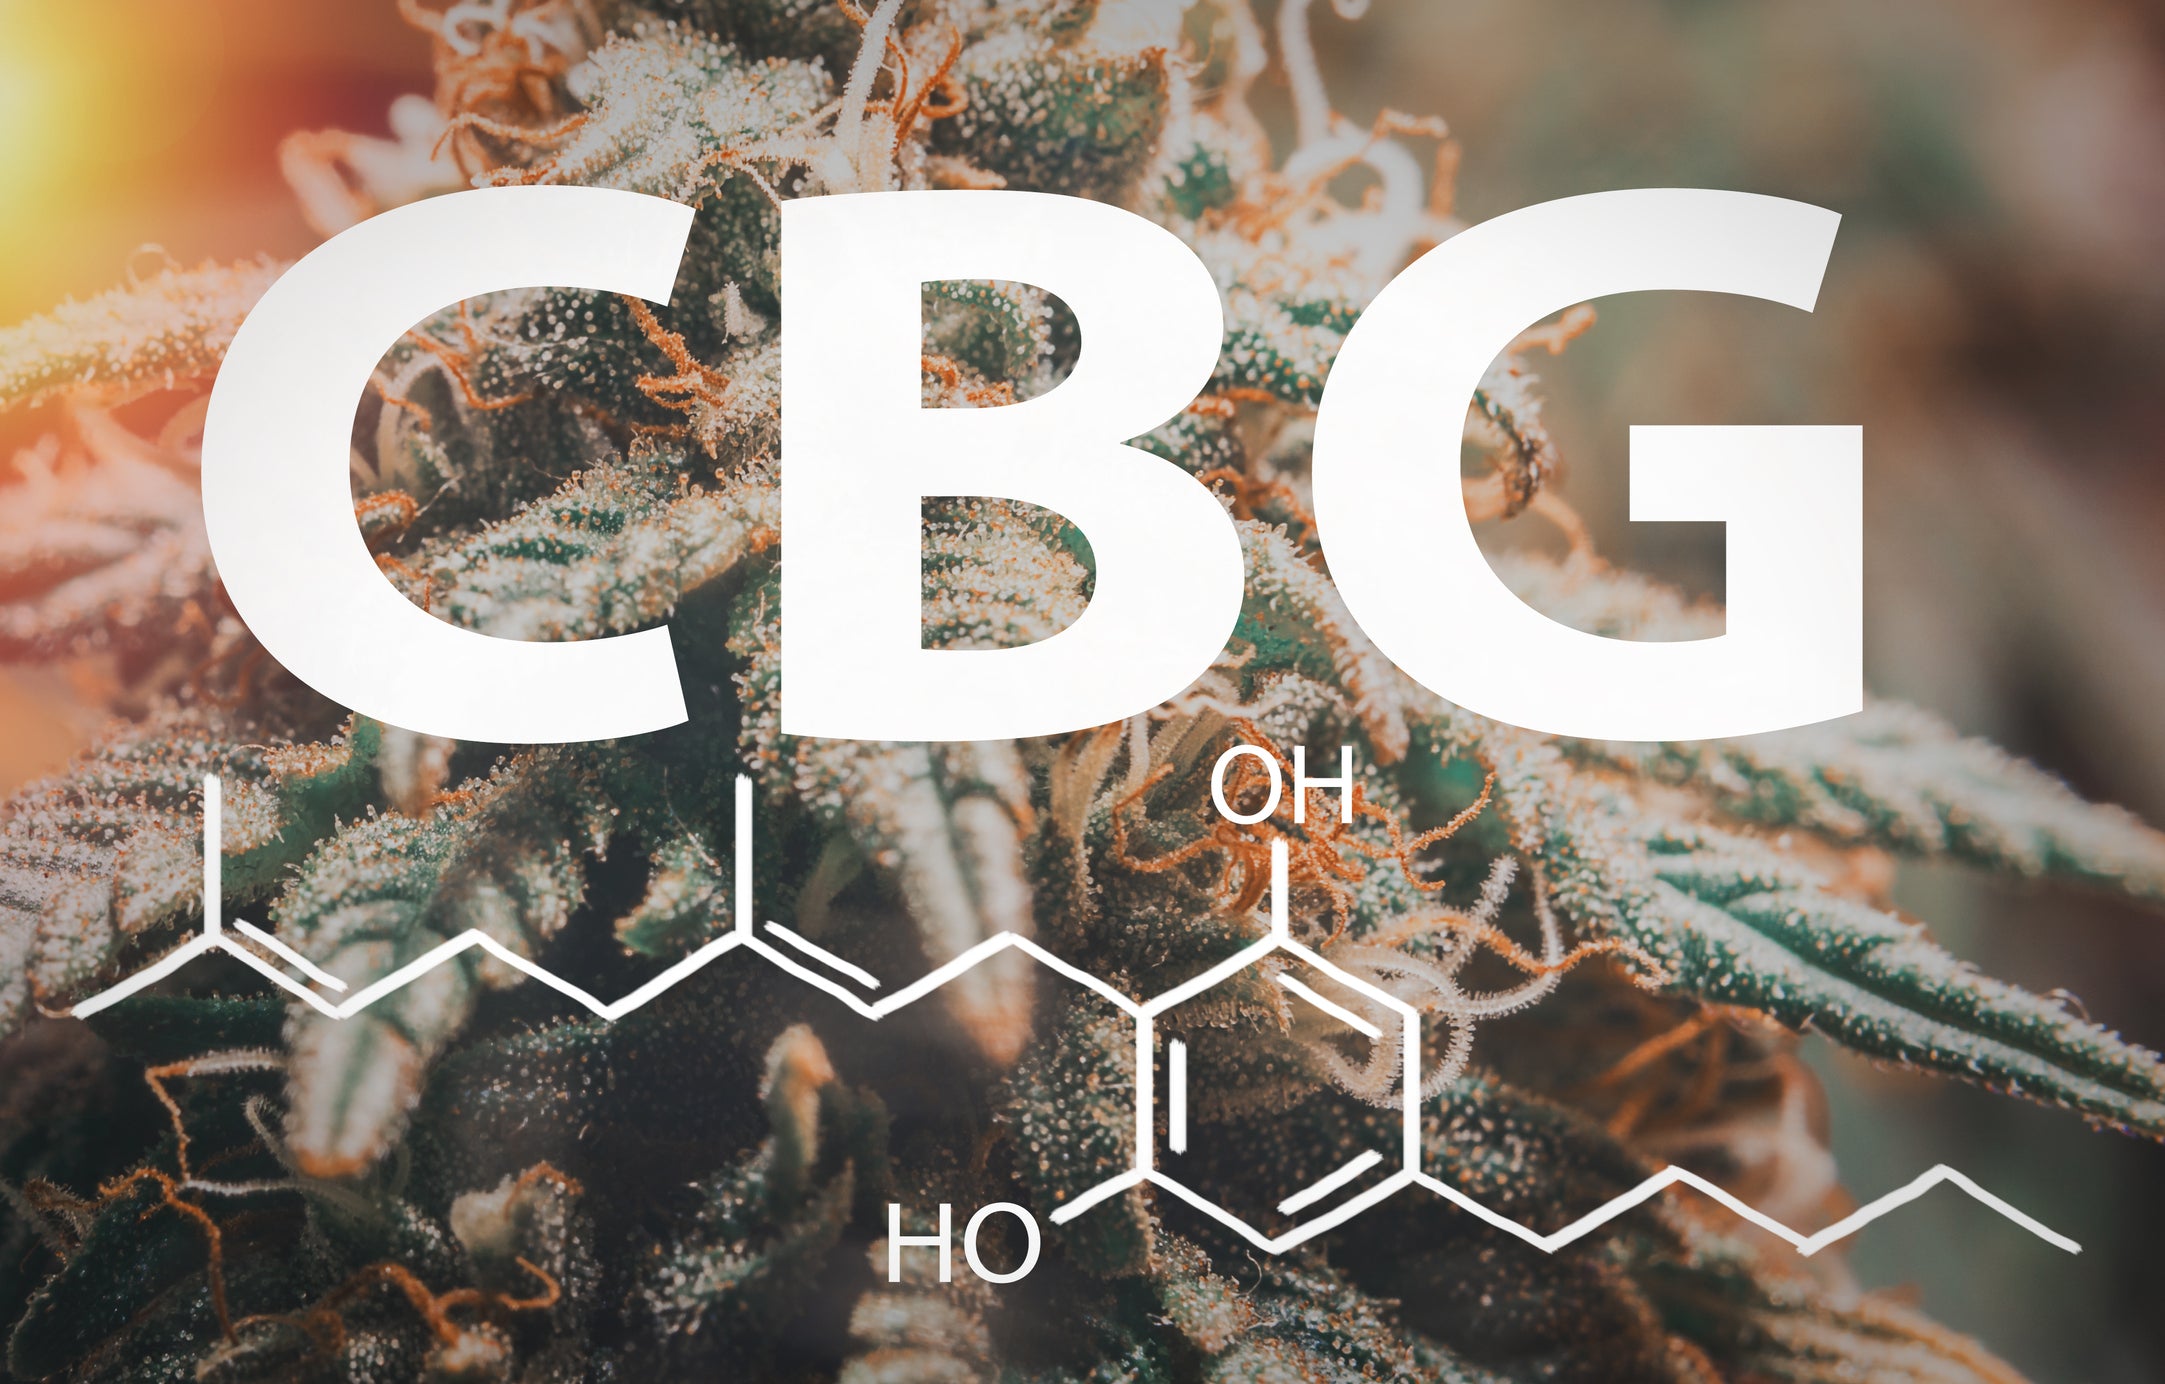 Cannabigerol (CBG) is another cannabinoid that may have several potential health benefits.